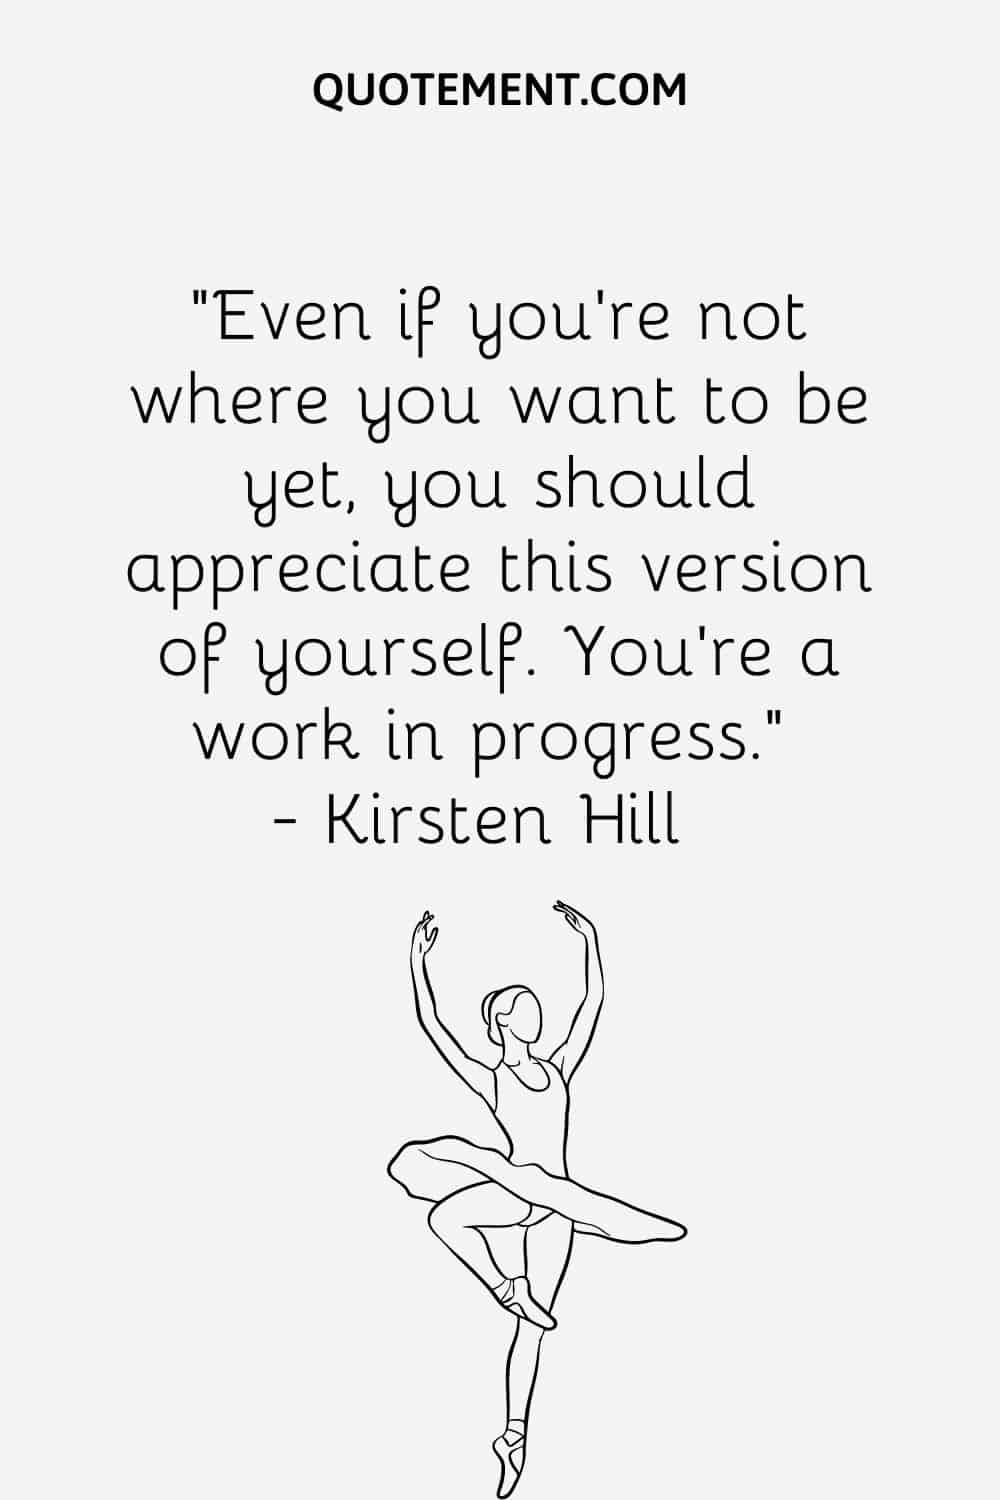 Even if you’re not where you want to be yet, you should appreciate this version of yourself. You’re a work in progress.